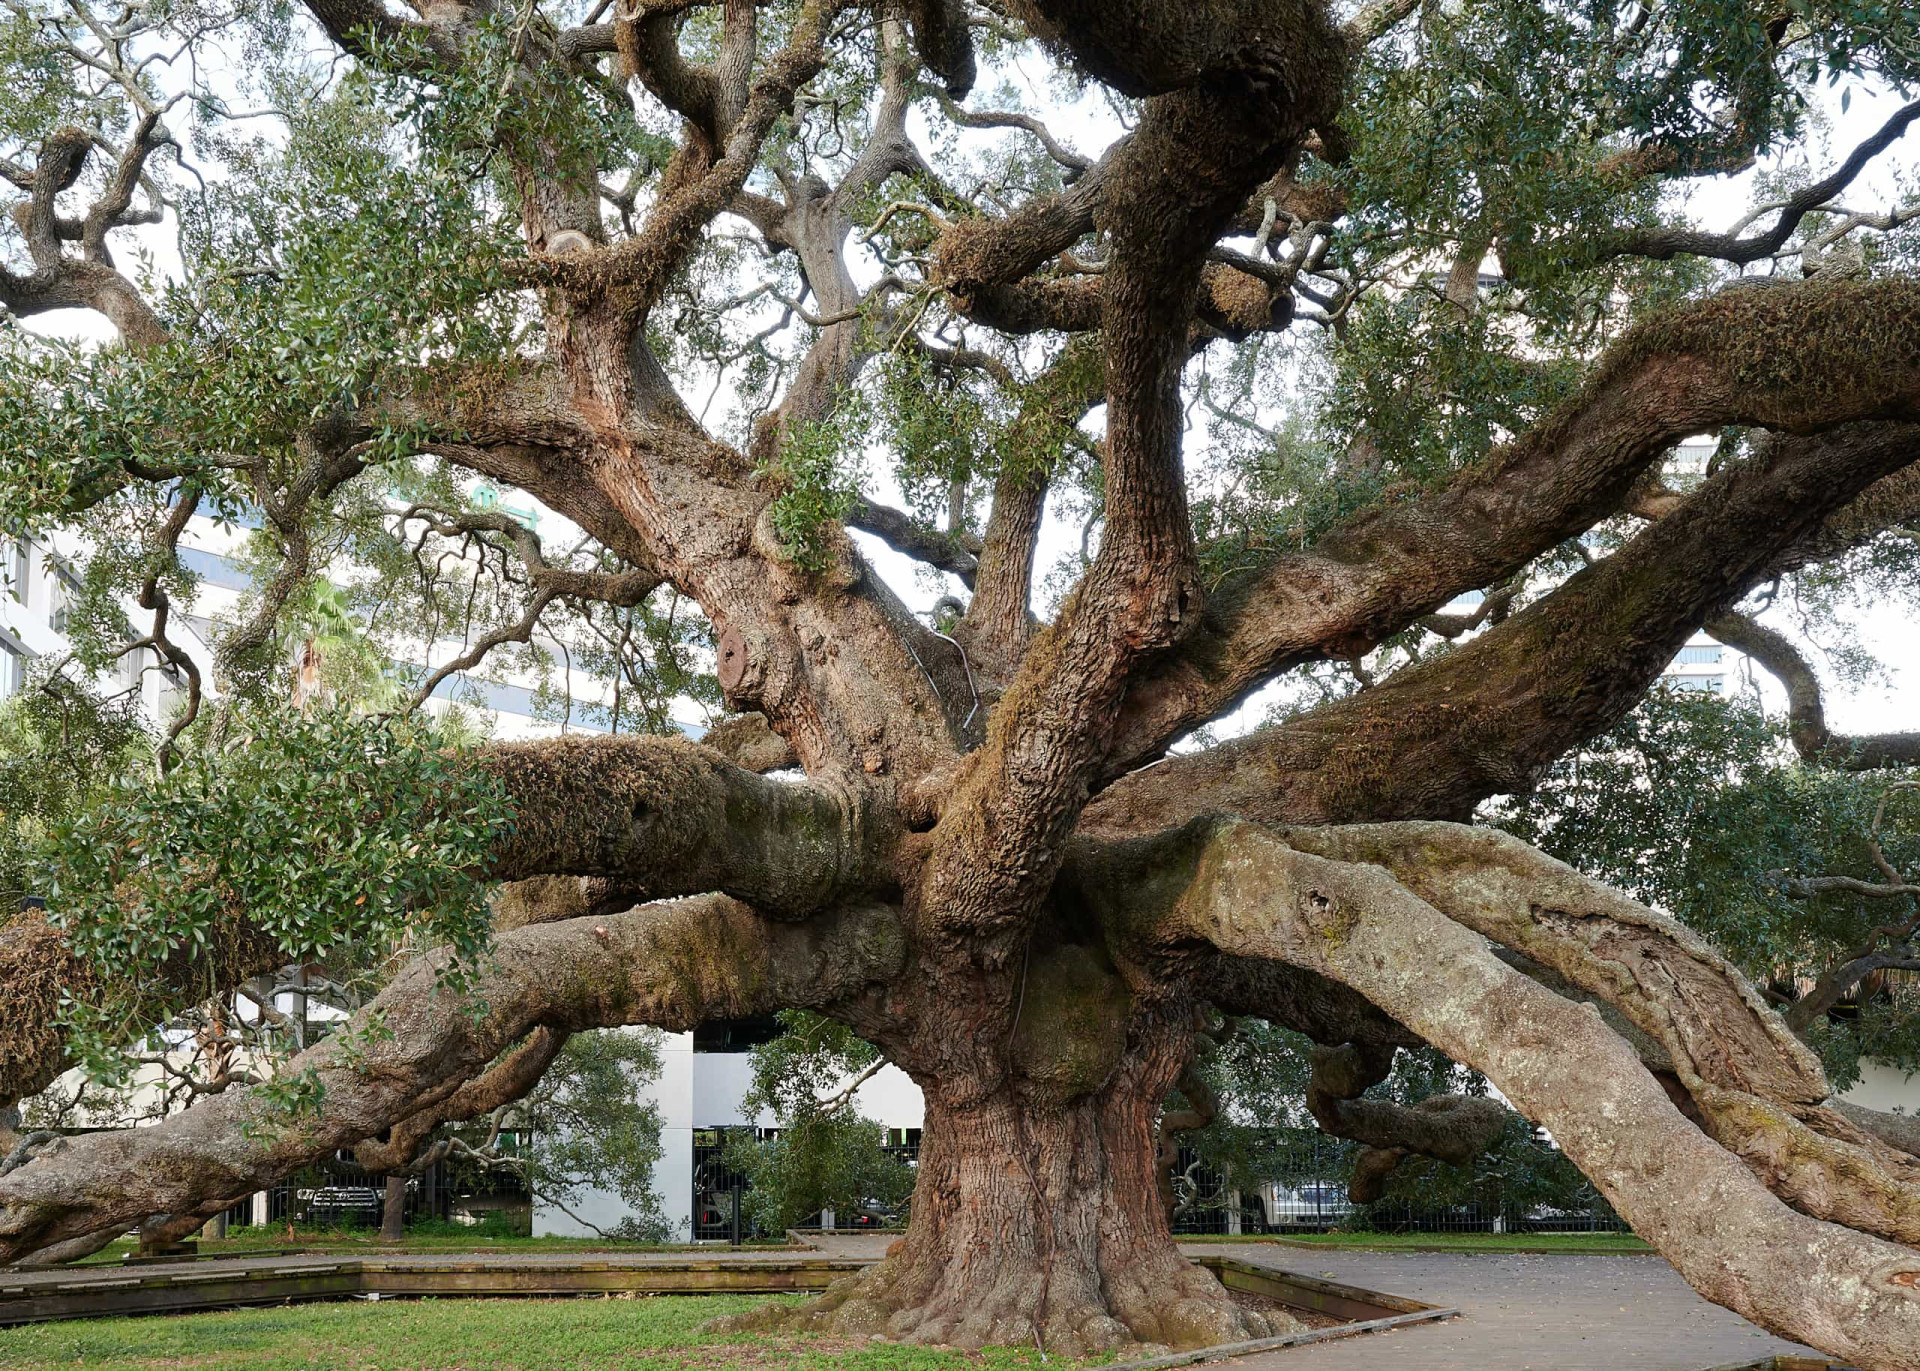 <p>The huge, wide-girth branches of the 250-year-old Treaty Oak standing in Jessie Ball DuPont Park resemble the tentacles of a colossal octopus.</p><p>You may also like:<a href="https://www.starsinsider.com/n/309193?utm_source=msn.com&utm_medium=display&utm_campaign=referral_description&utm_content=198095v22en-en"> The different ways we worship </a></p>